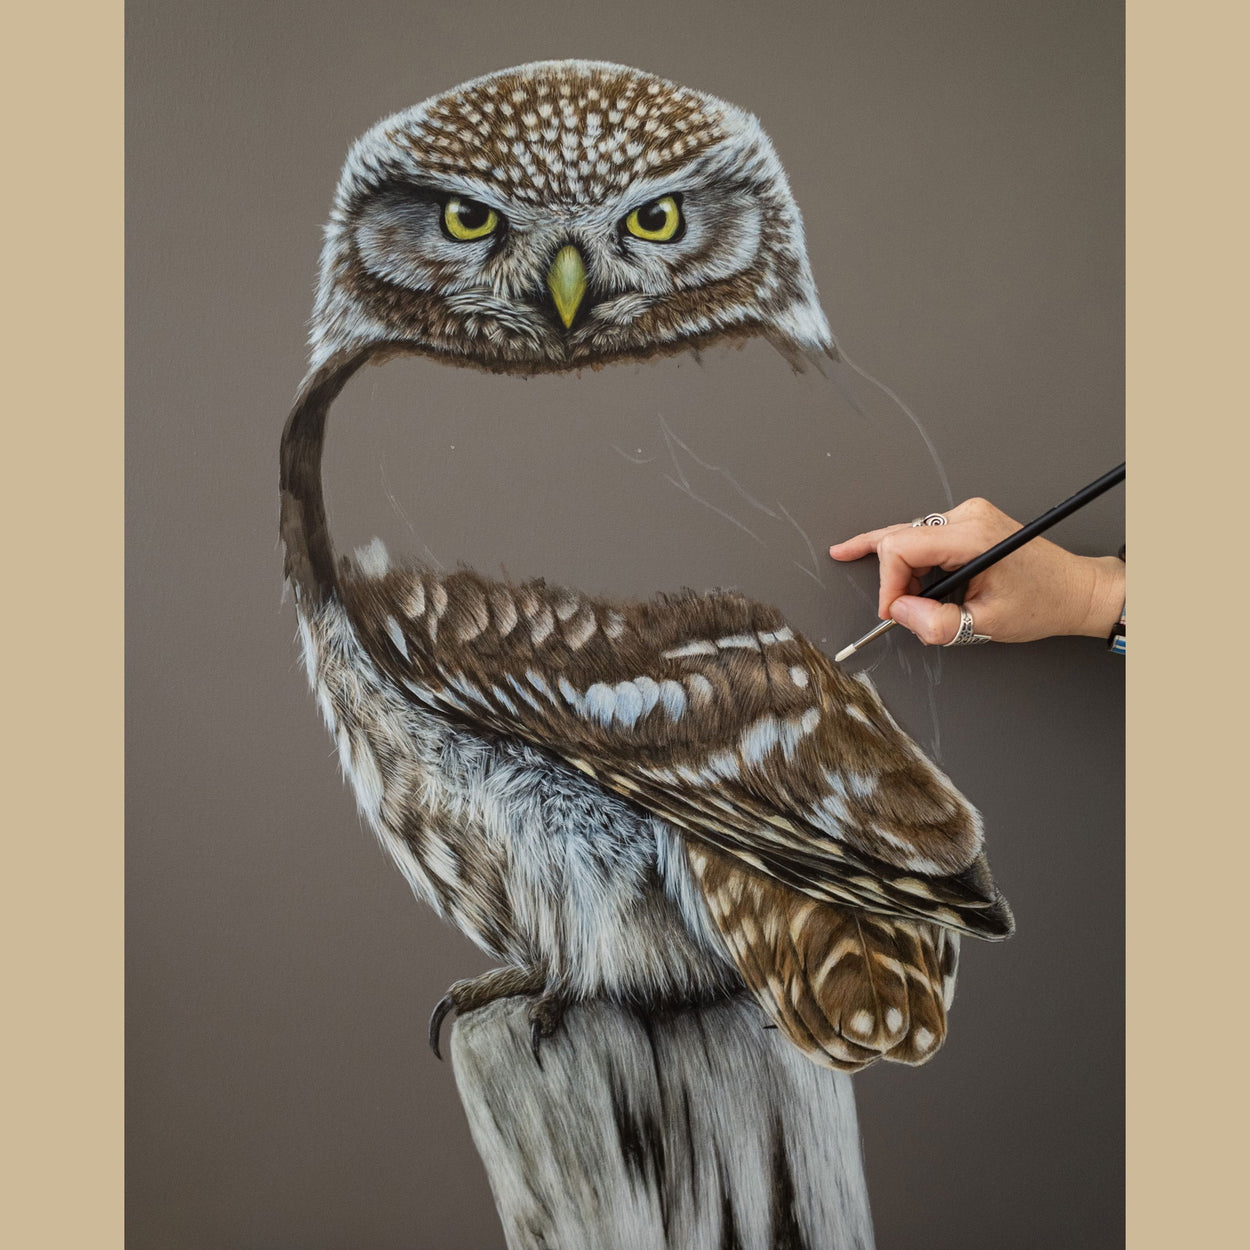 Hand holding a paintbrush over a partially completed painting of a little owl